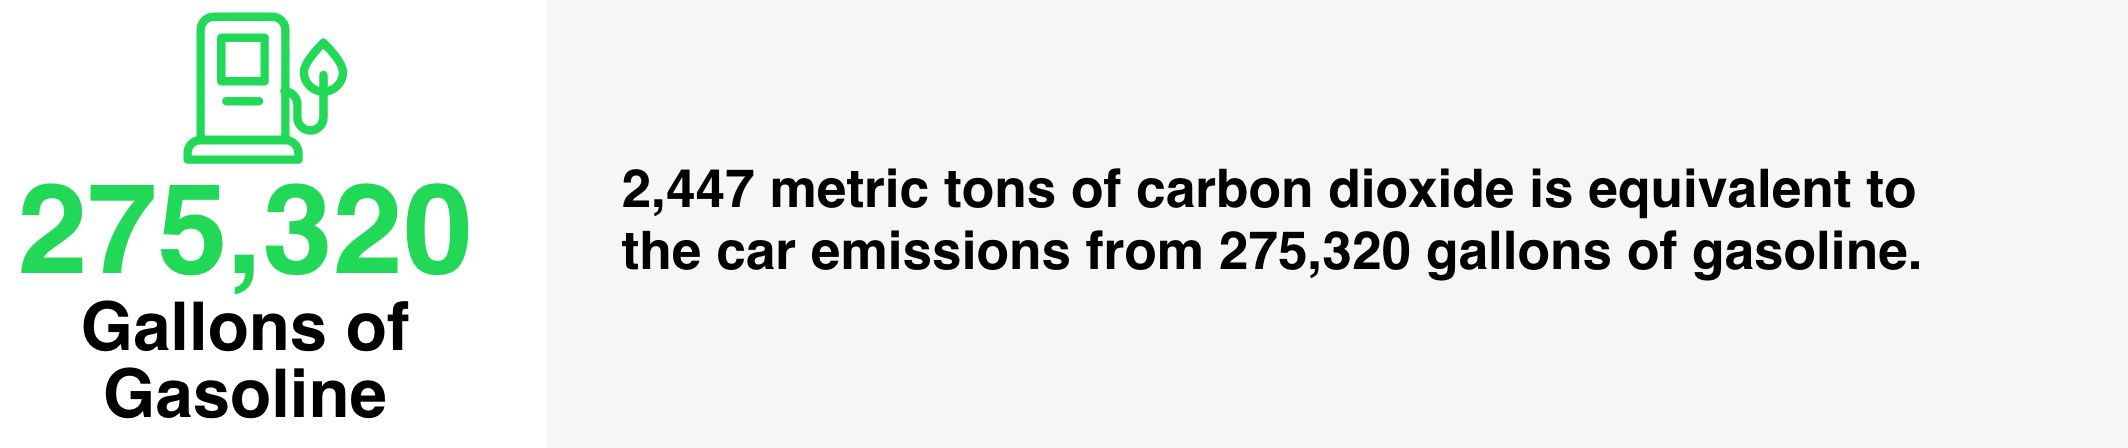 2,447 metric tons of carbon dioxide is equivalent to the car emissions from 275,320 gallons of gasoline.